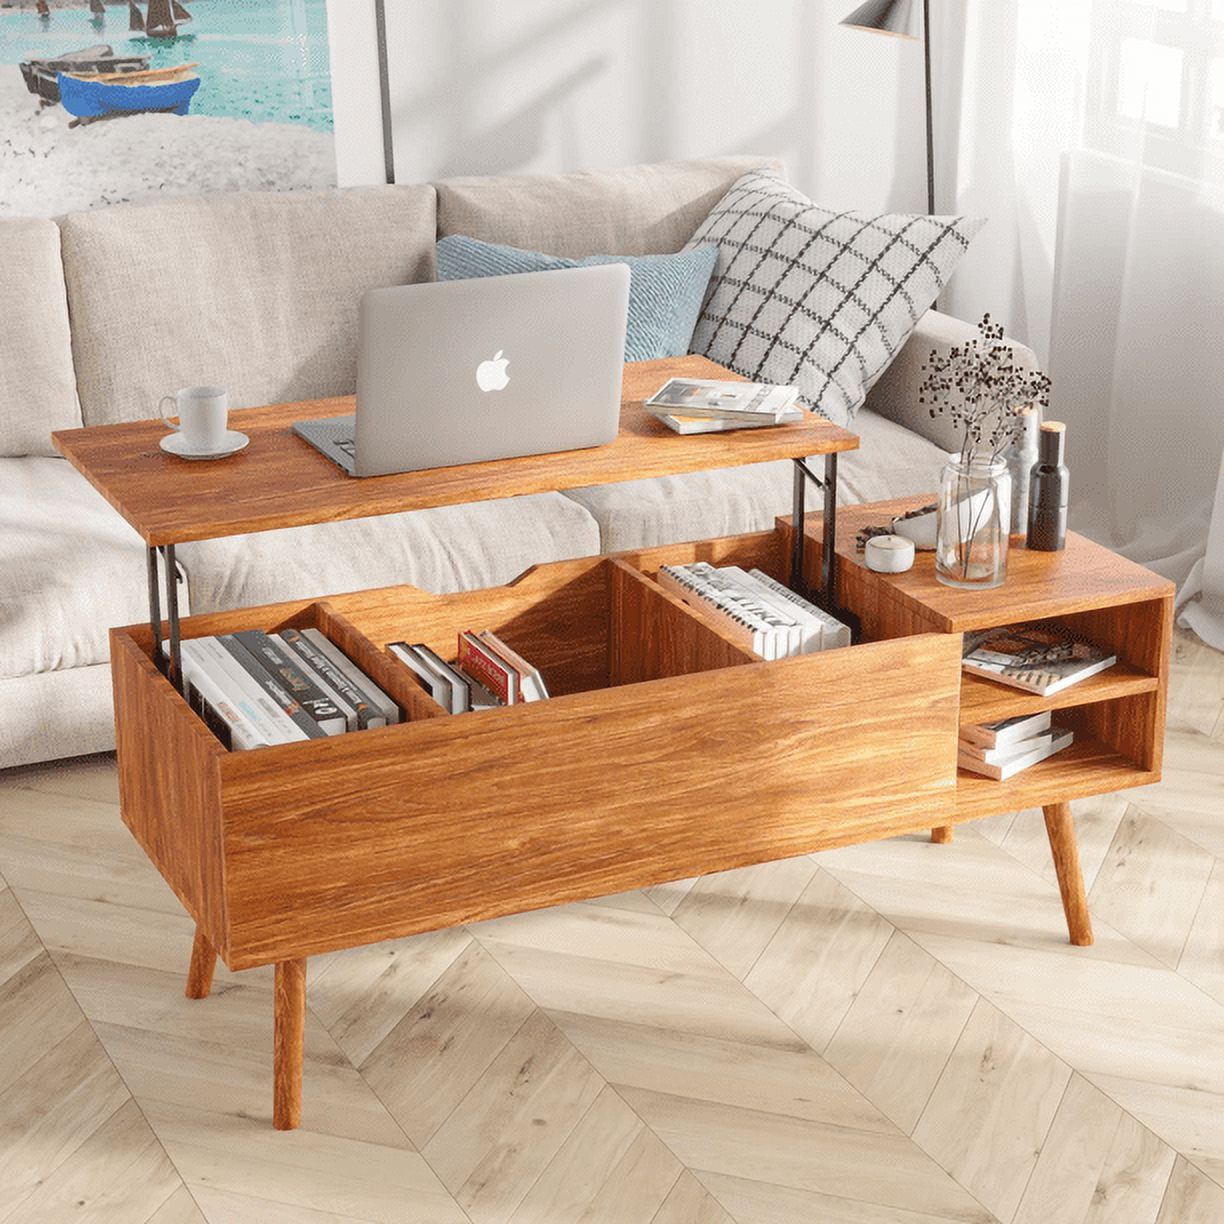 Modern Lift Top Coffee Table With Hidden Compartment Storage,Adjustable  Wood Table For Living Room,Brown – Walmart Inside Lift Top Coffee Tables With Shelves (View 2 of 15)